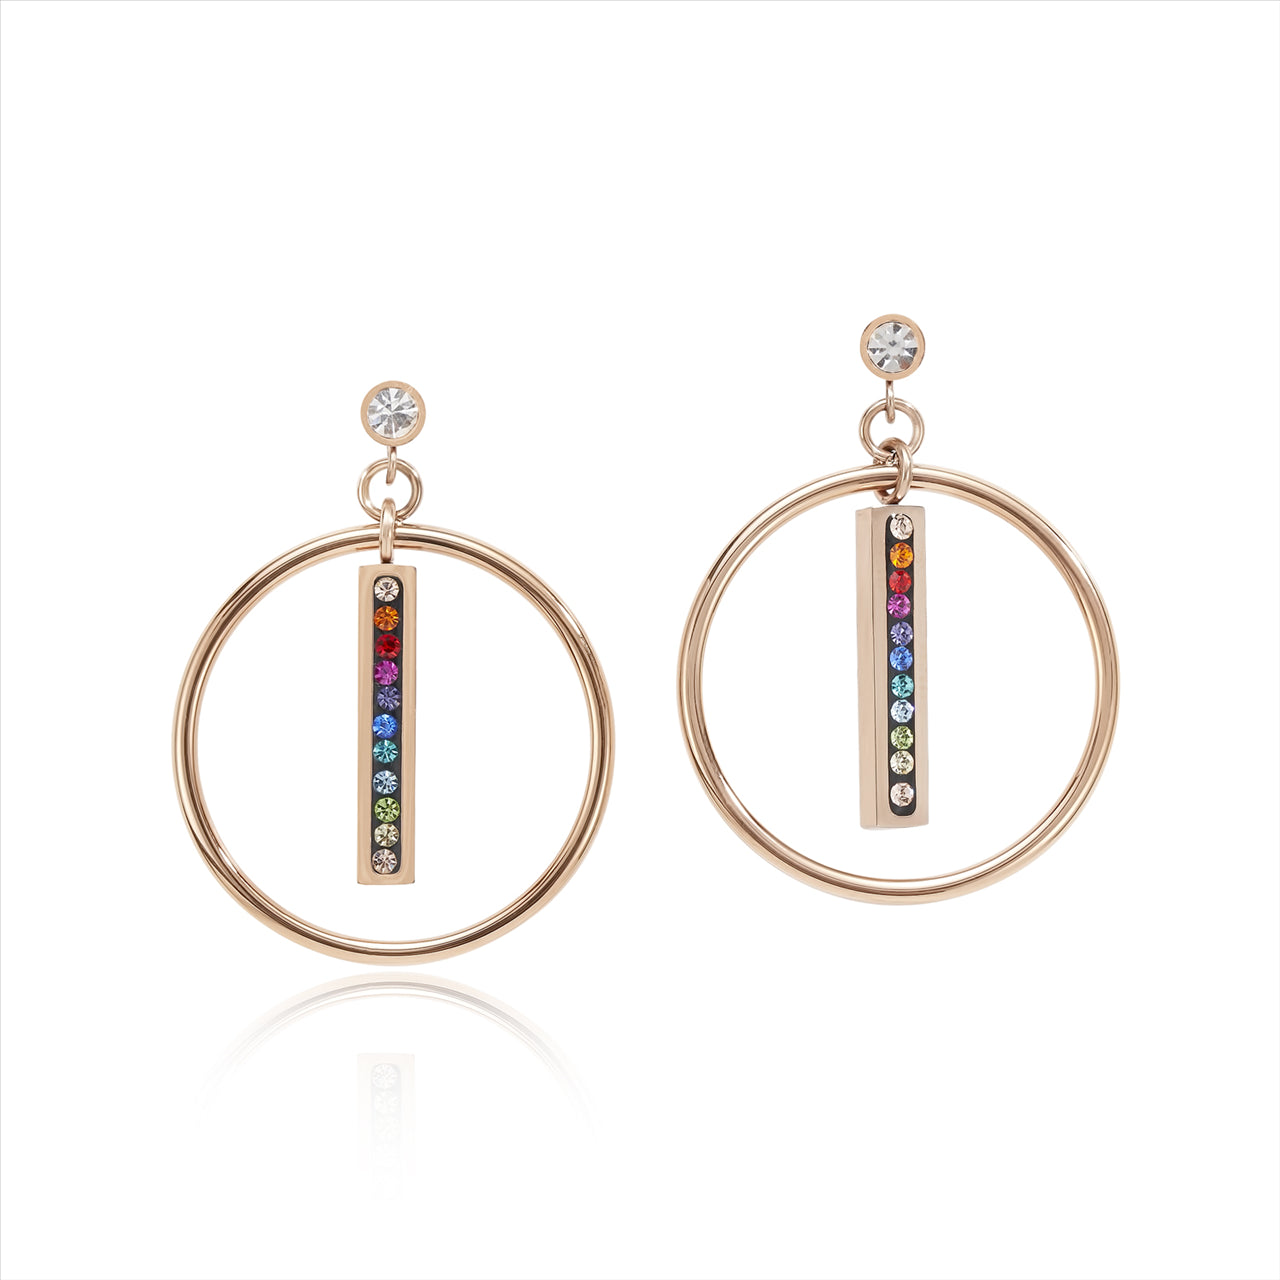 Earrings - CDL - rose gold plated stainless steel with multi coloured Swarovski crystal drop surrounded in a circle design with sterling silver fittings